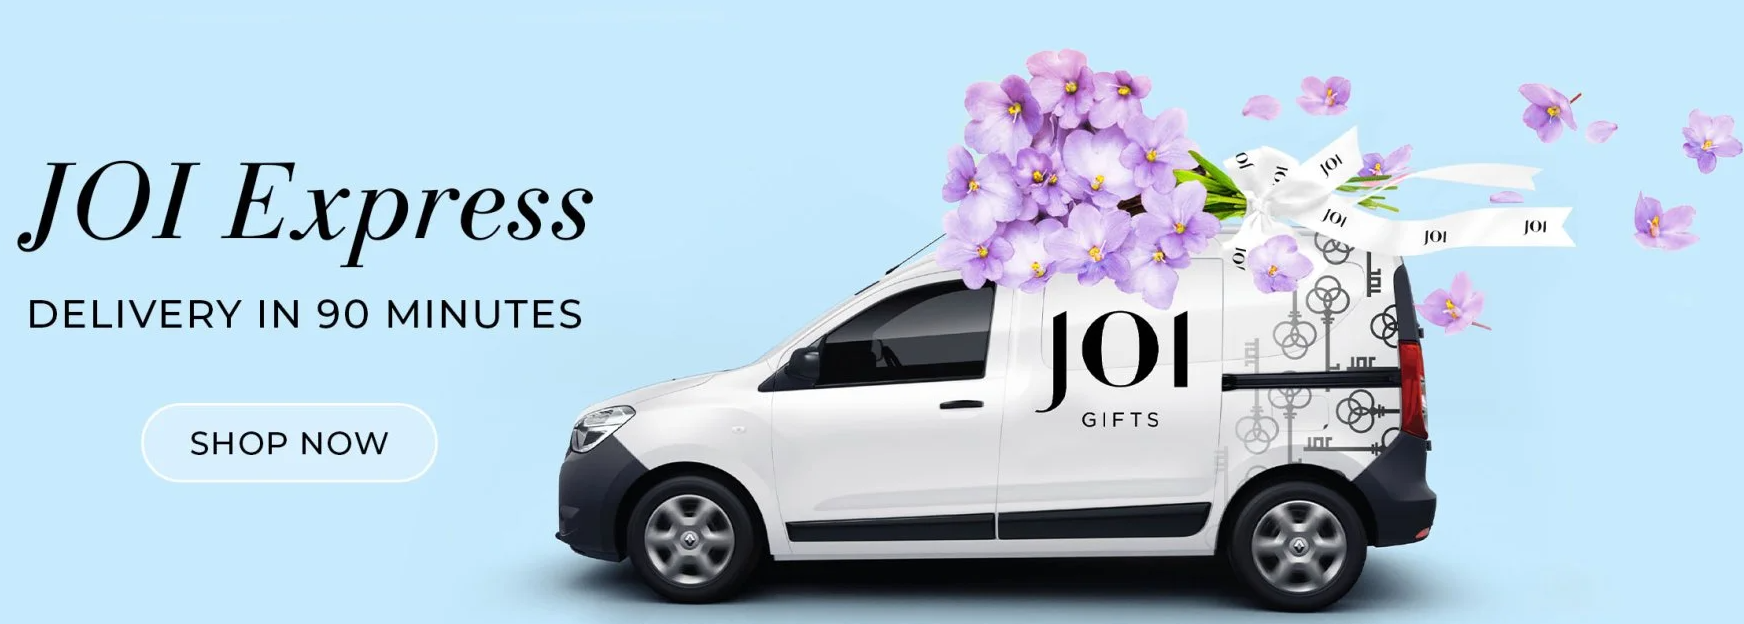 Joi Gifts UAE Offer